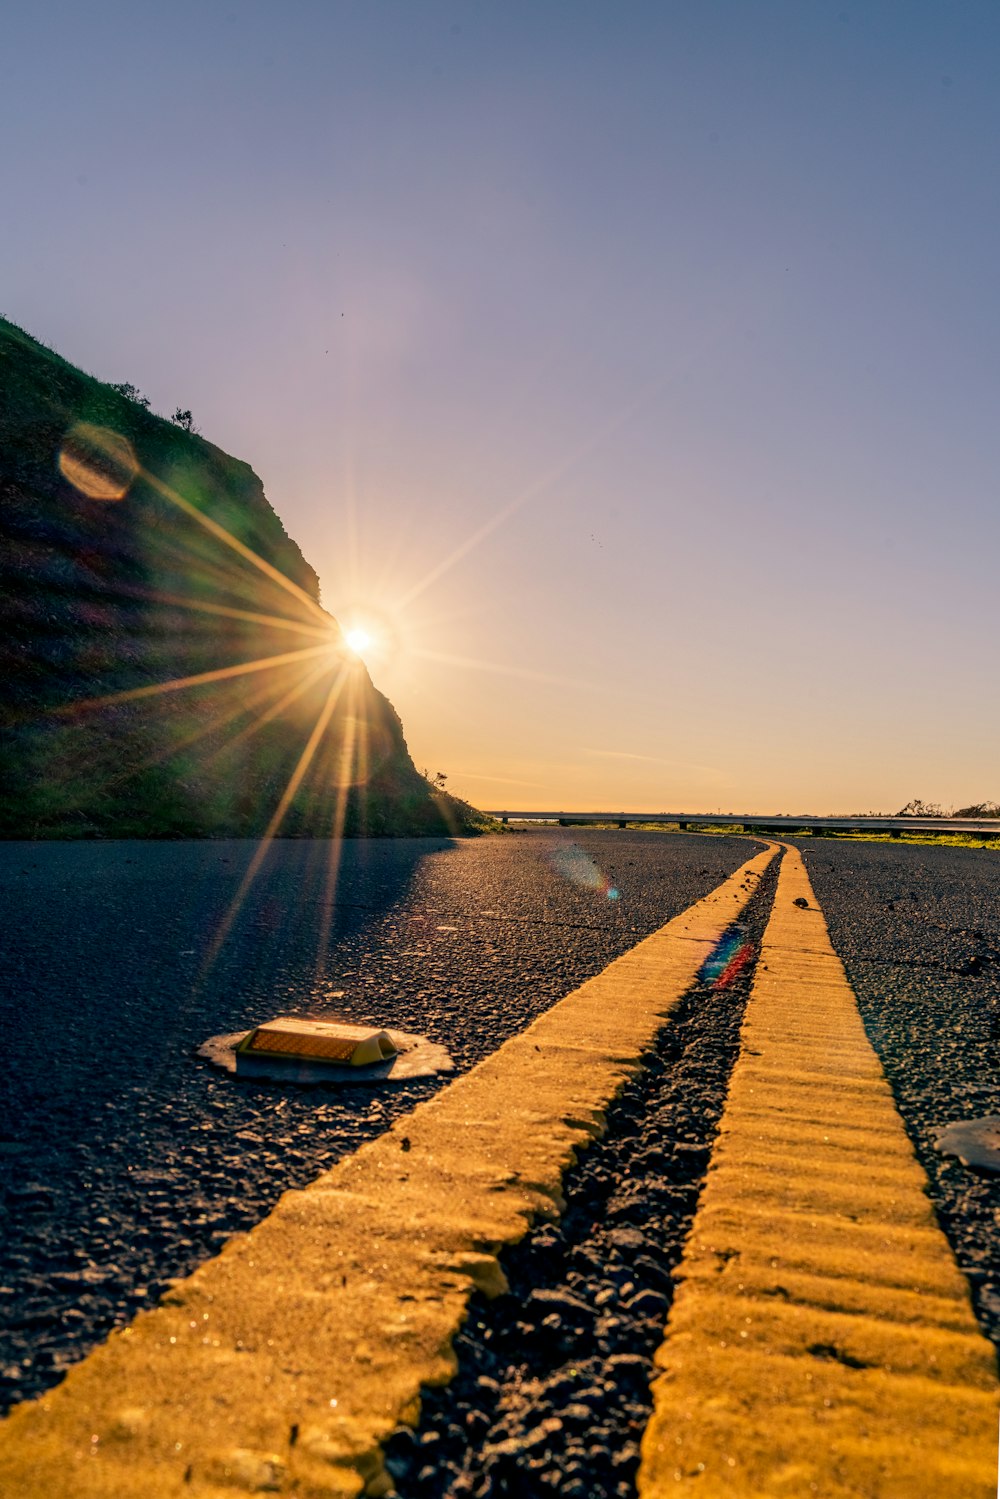 the sun is setting over a road with a yellow line